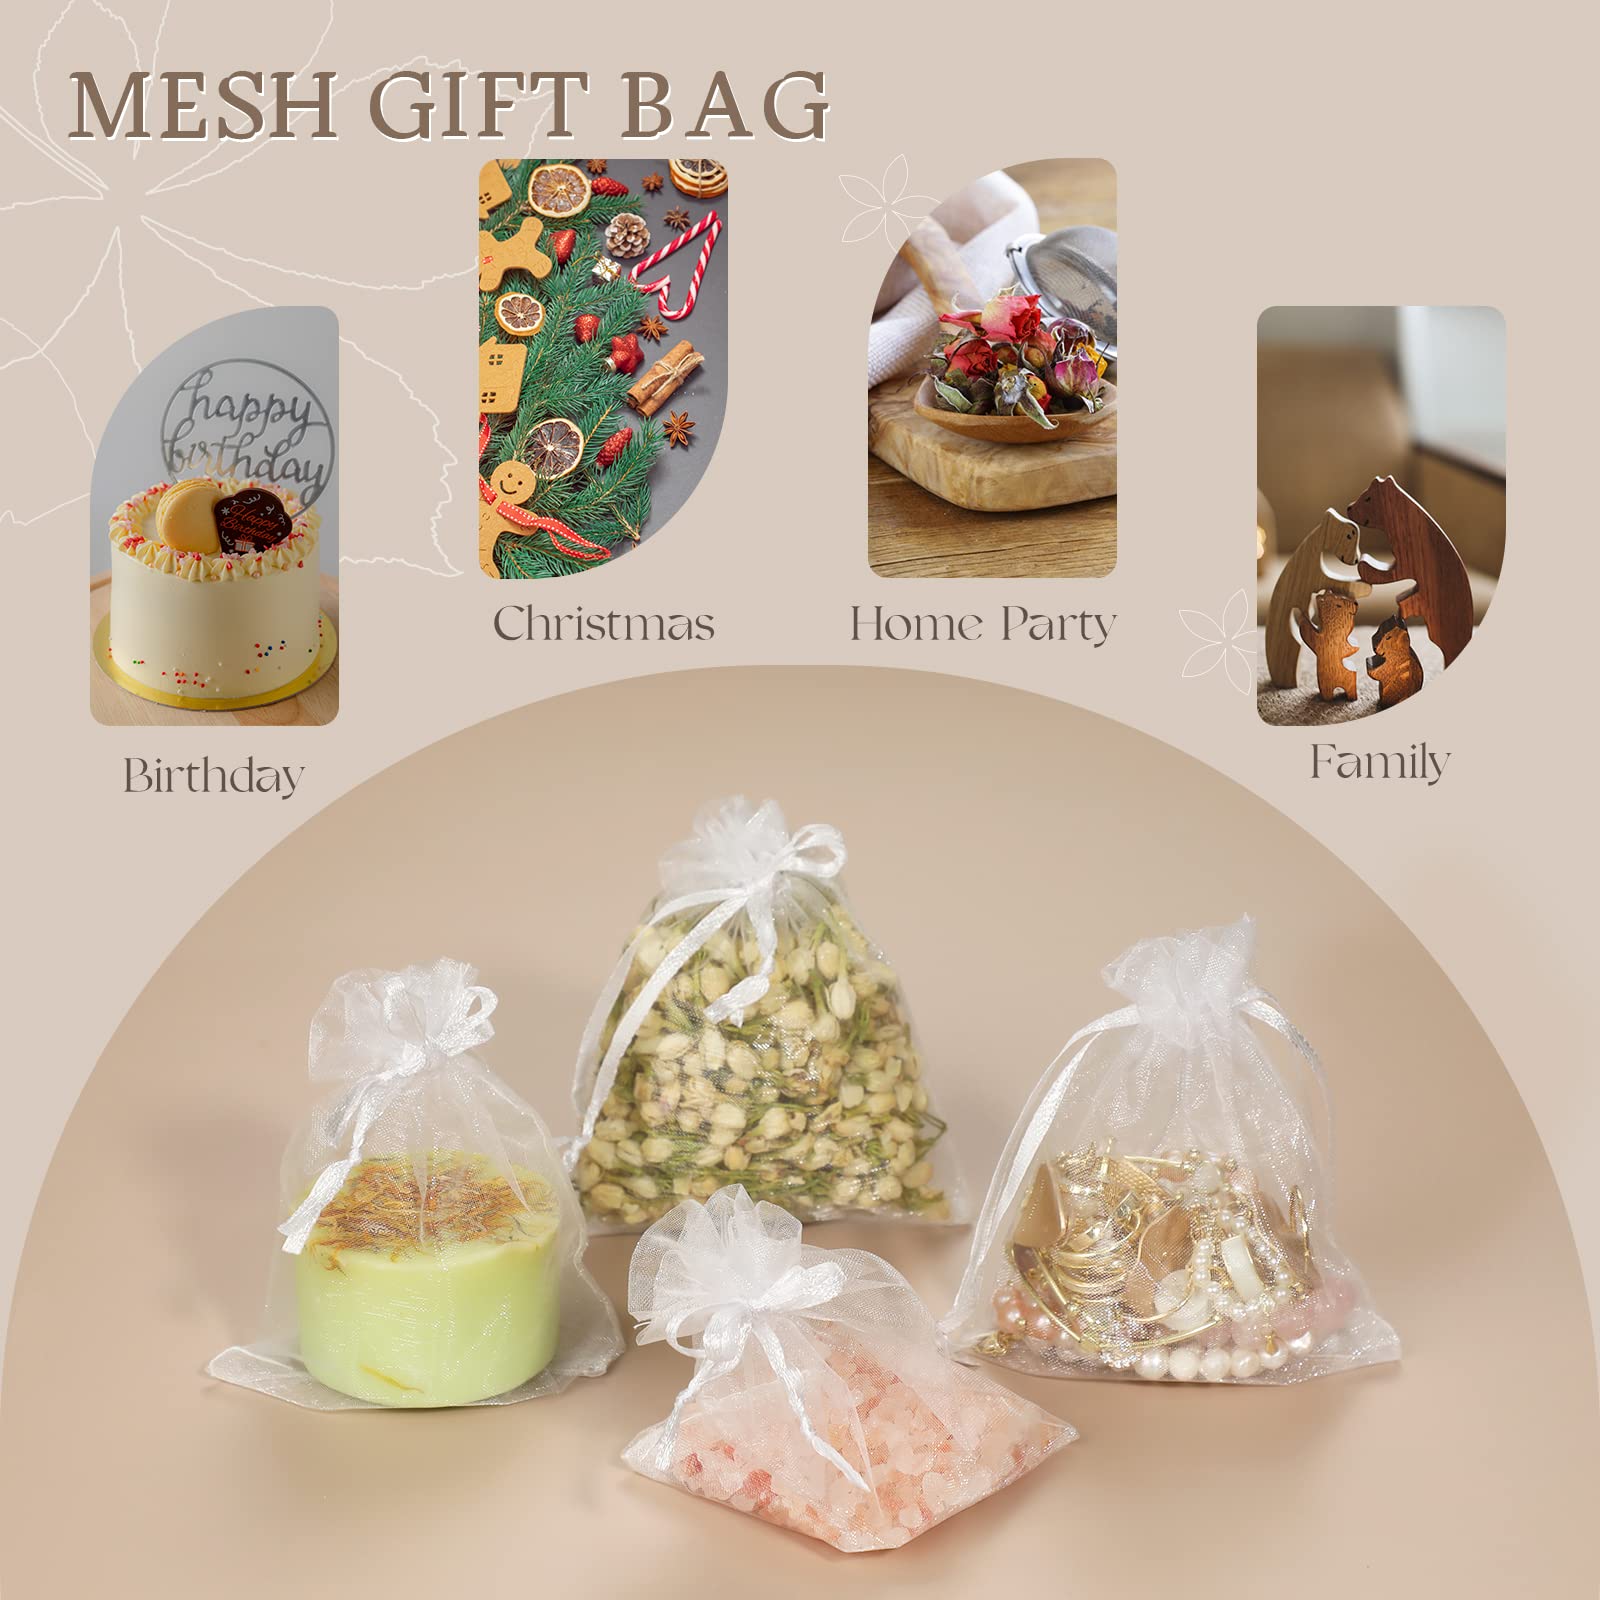 200 PCS Premium Sheer Organza Bags with Drawstring - 4x4.72 Inch (10x12cm) - Bulk Small Mesh Gift Bags for Jewelry, Soap, Candy, Wedding Party Favors for Guests, Sachet Bags for Small Business